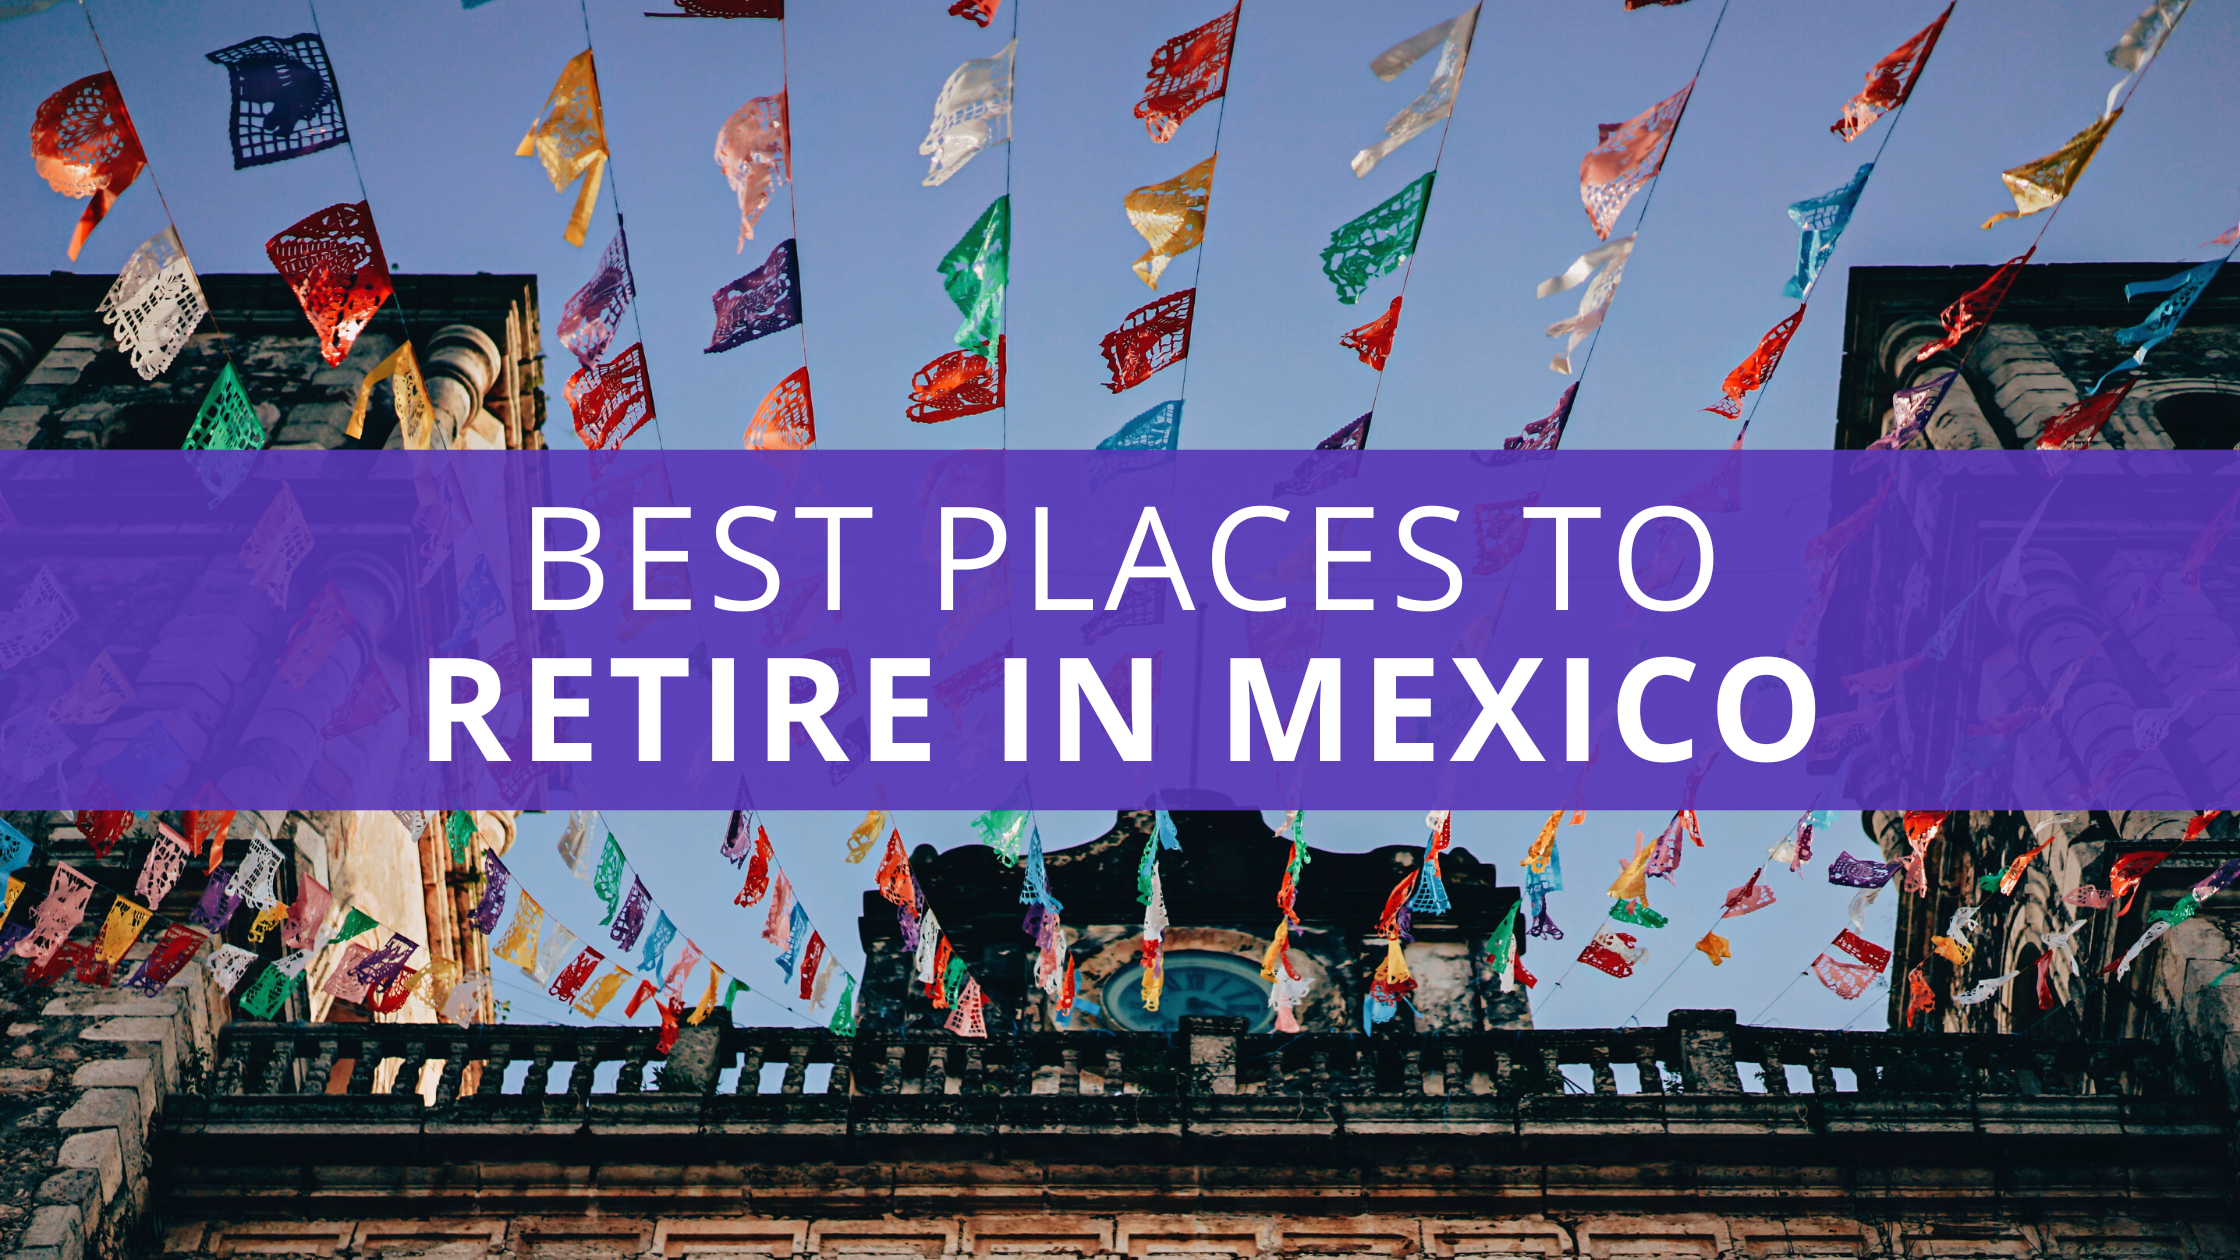 Best Places To Retire in Mexico